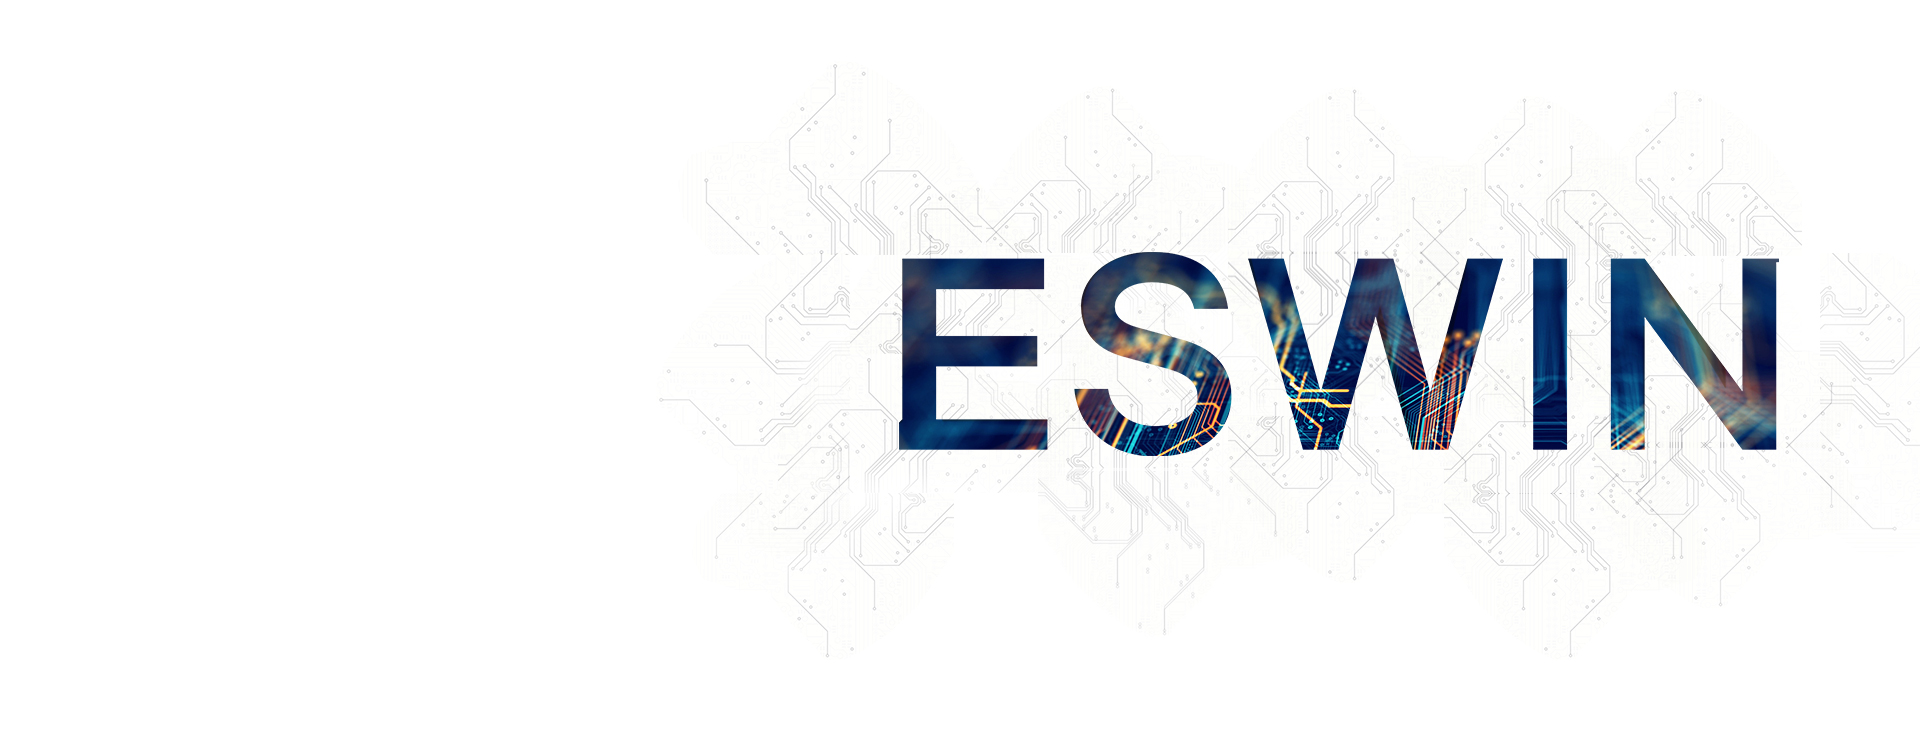 About Eswin